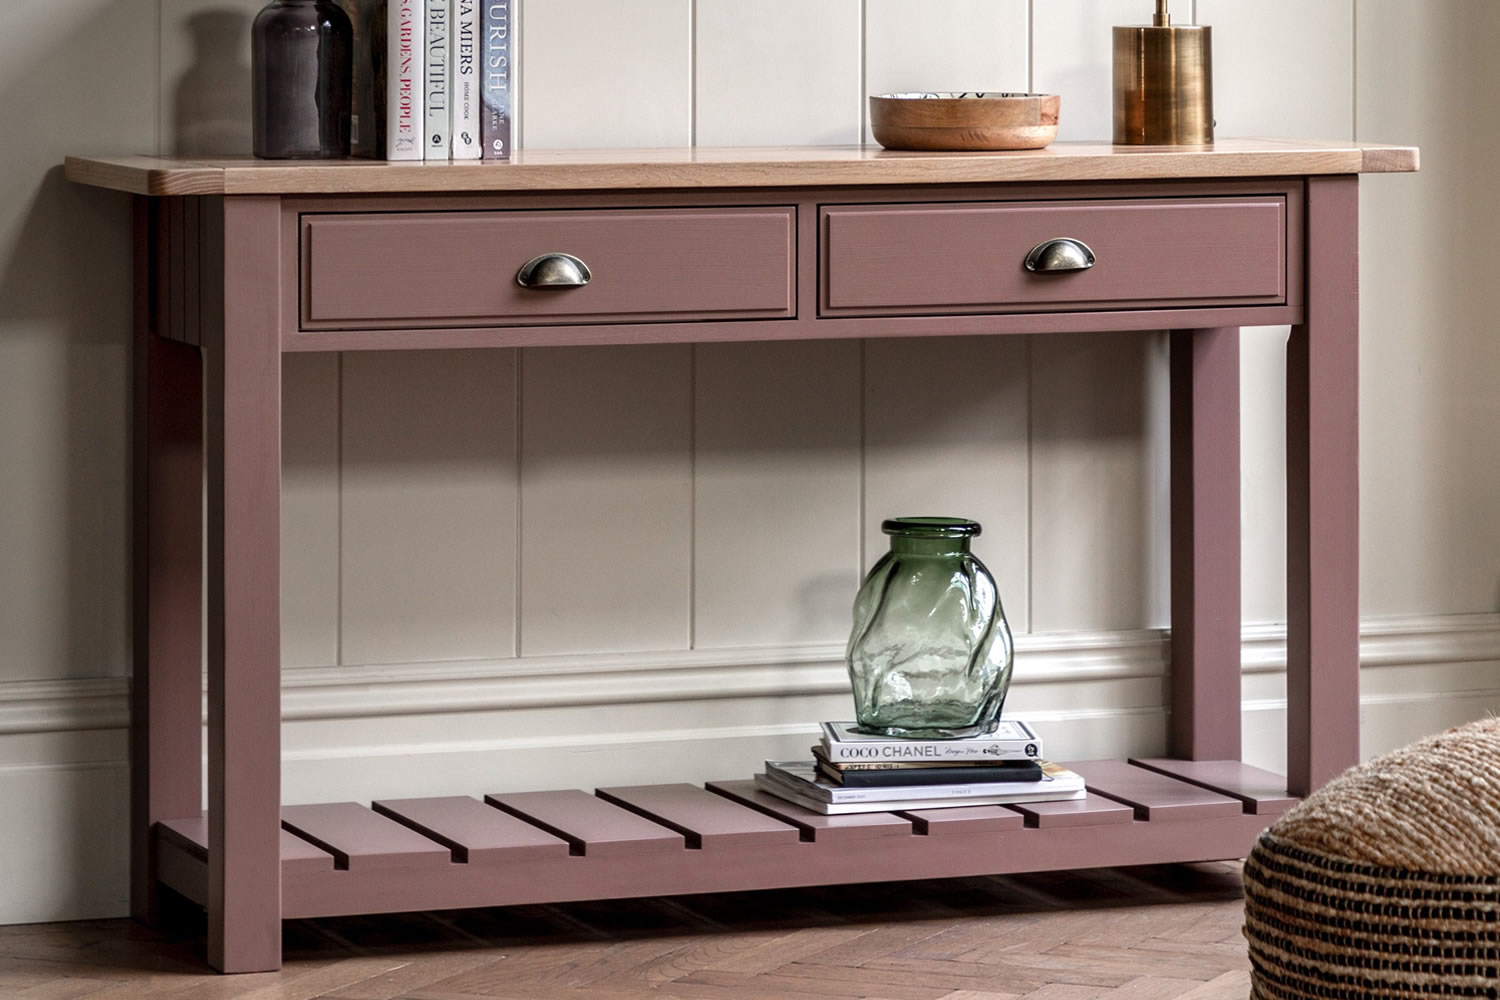 View Eton Clay 2Drawer Console Crafted From Oak Pine MDF 2 Spacious Drawers Lower Slatted Storage Shelf Sleek Metal Handles Easy Assembly information